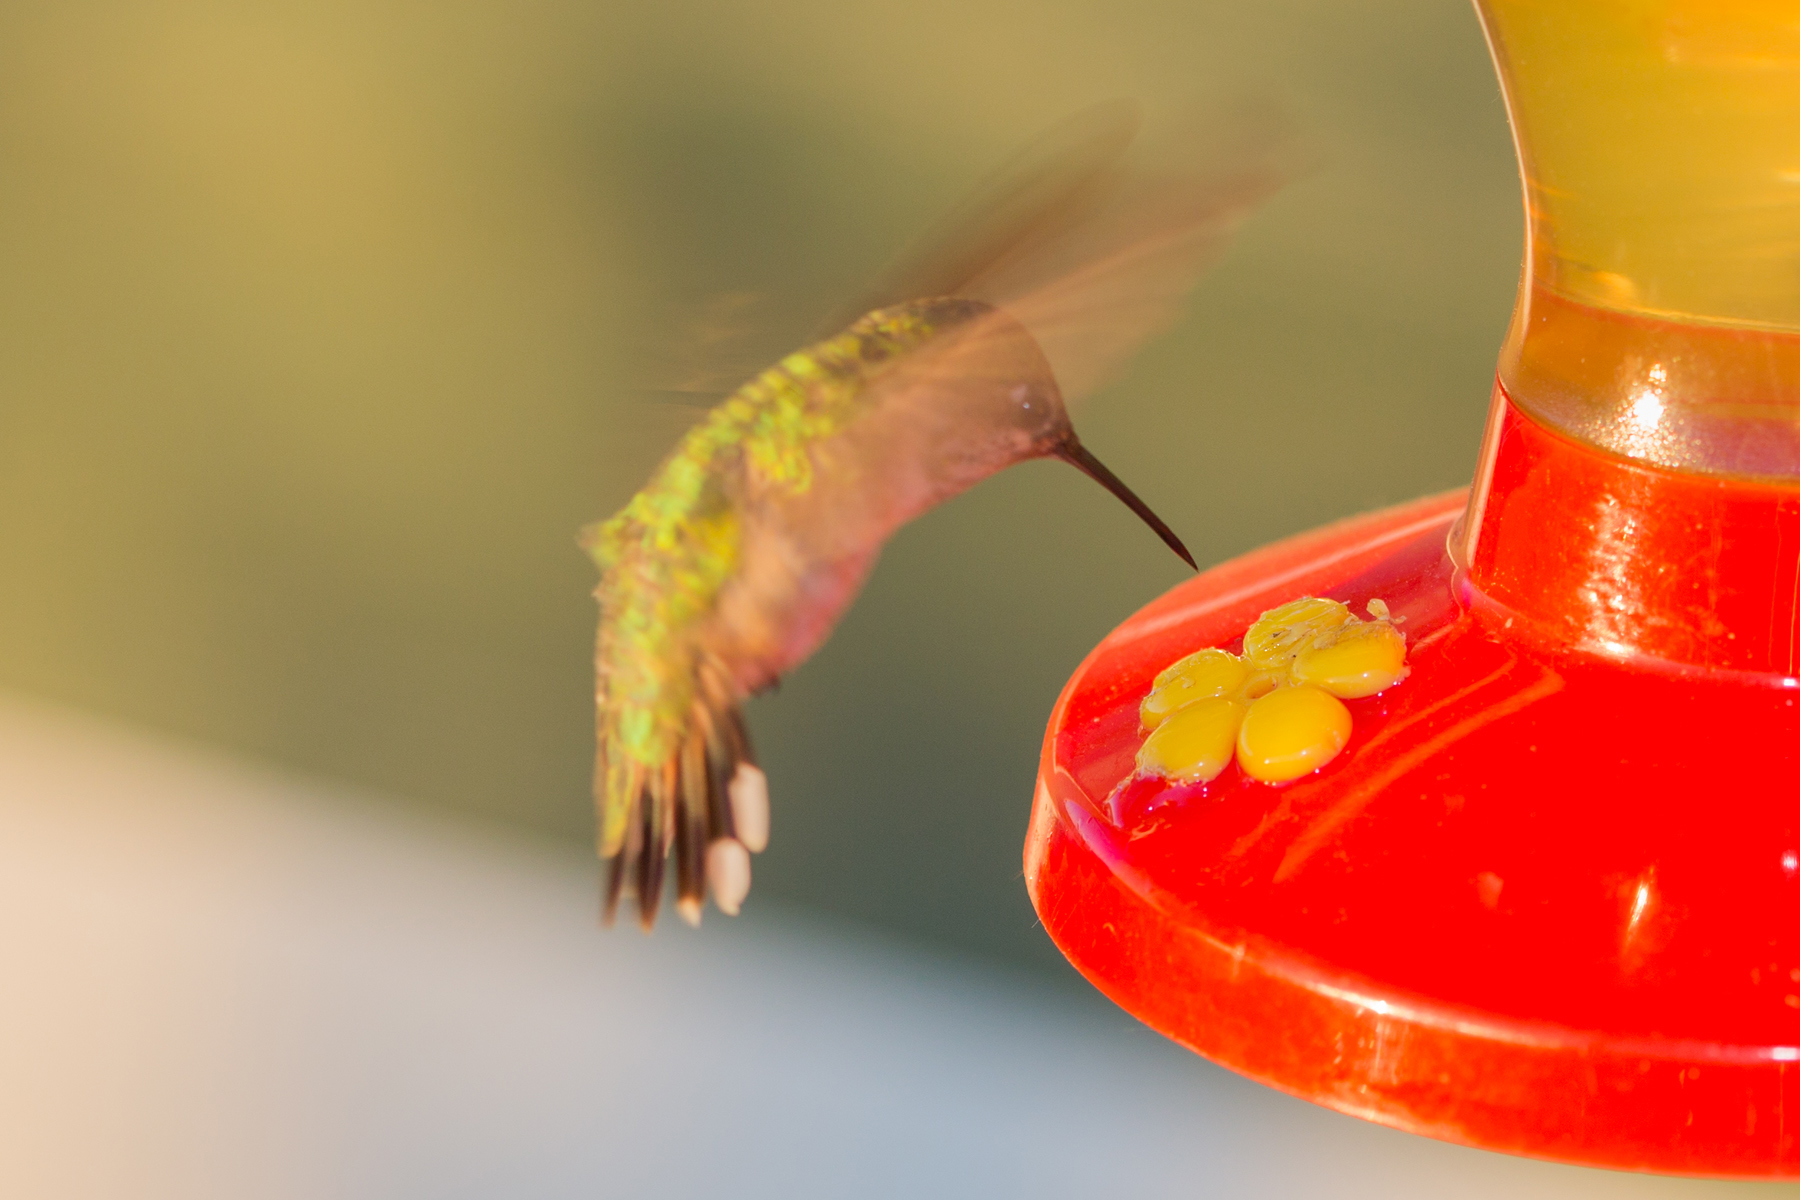 Hummingbird, Red Lodge, MT, 2021.  Click for next photo.